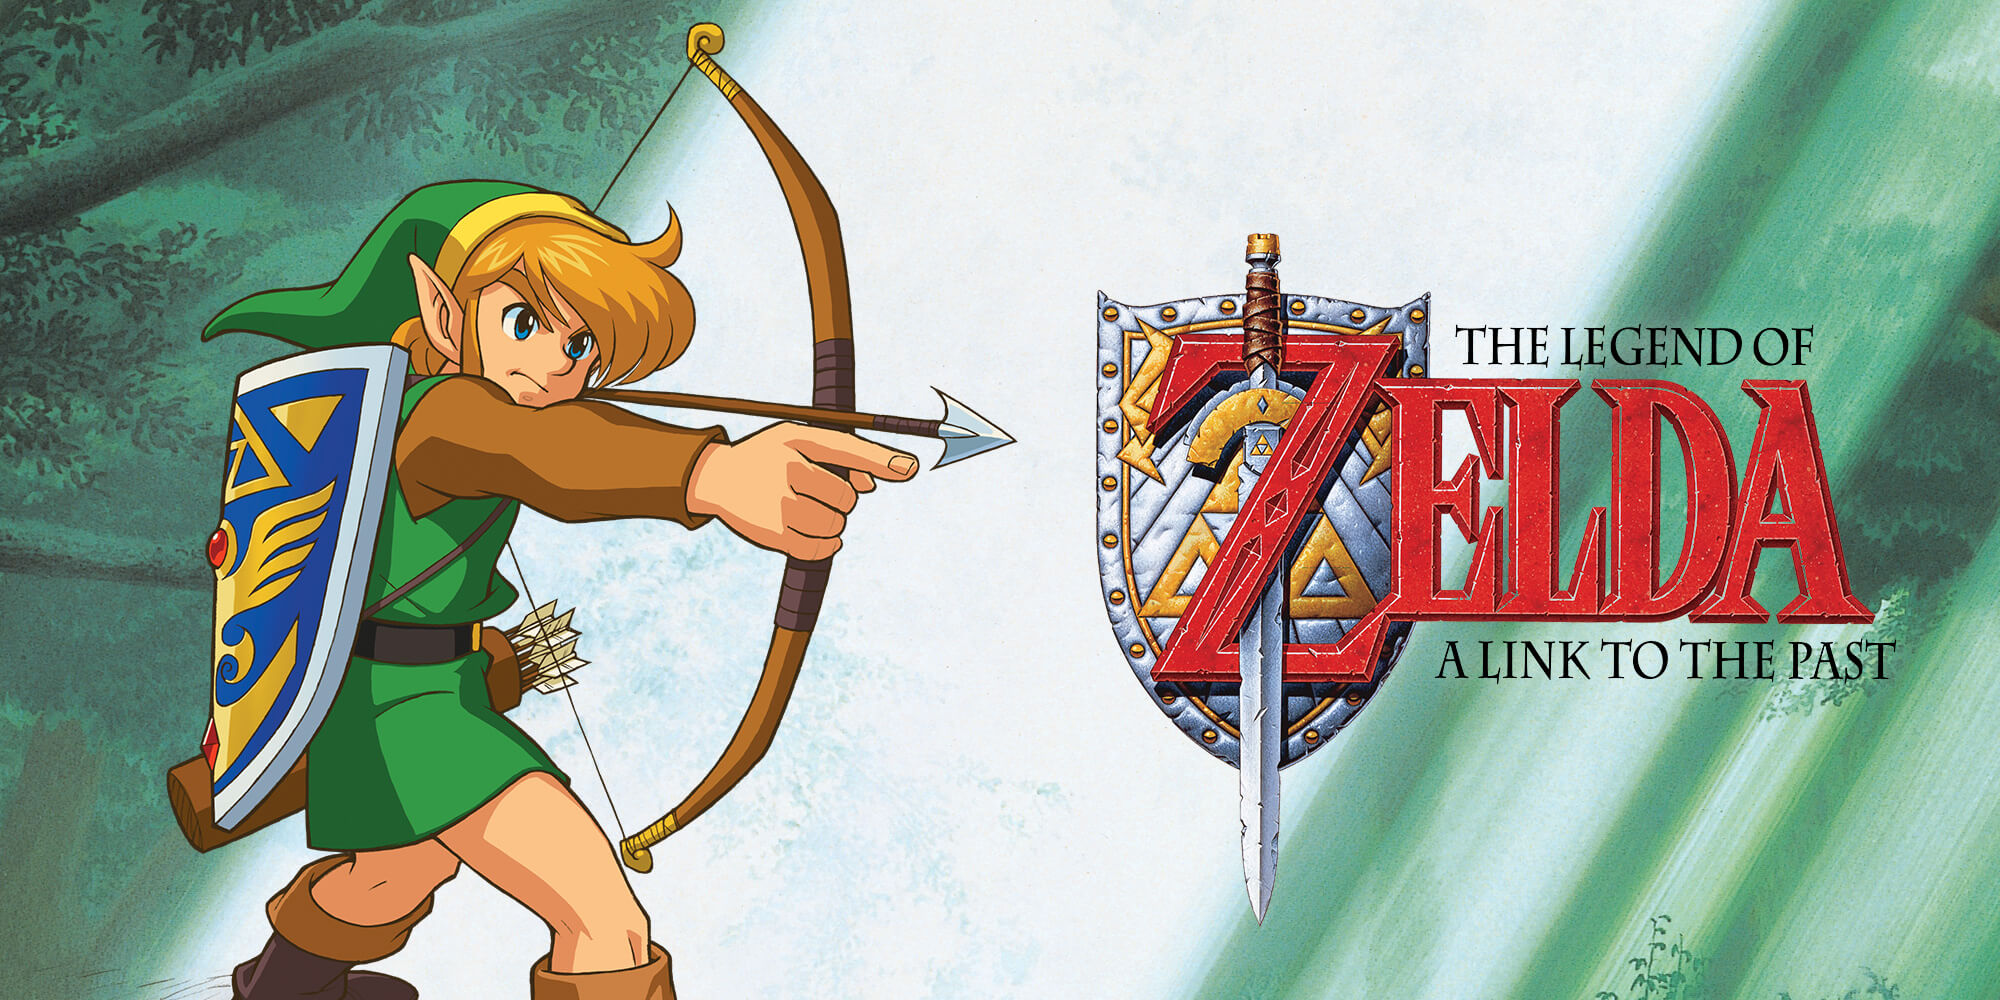 Download The Legend of Zelda A Link To The Past SNES ROM 